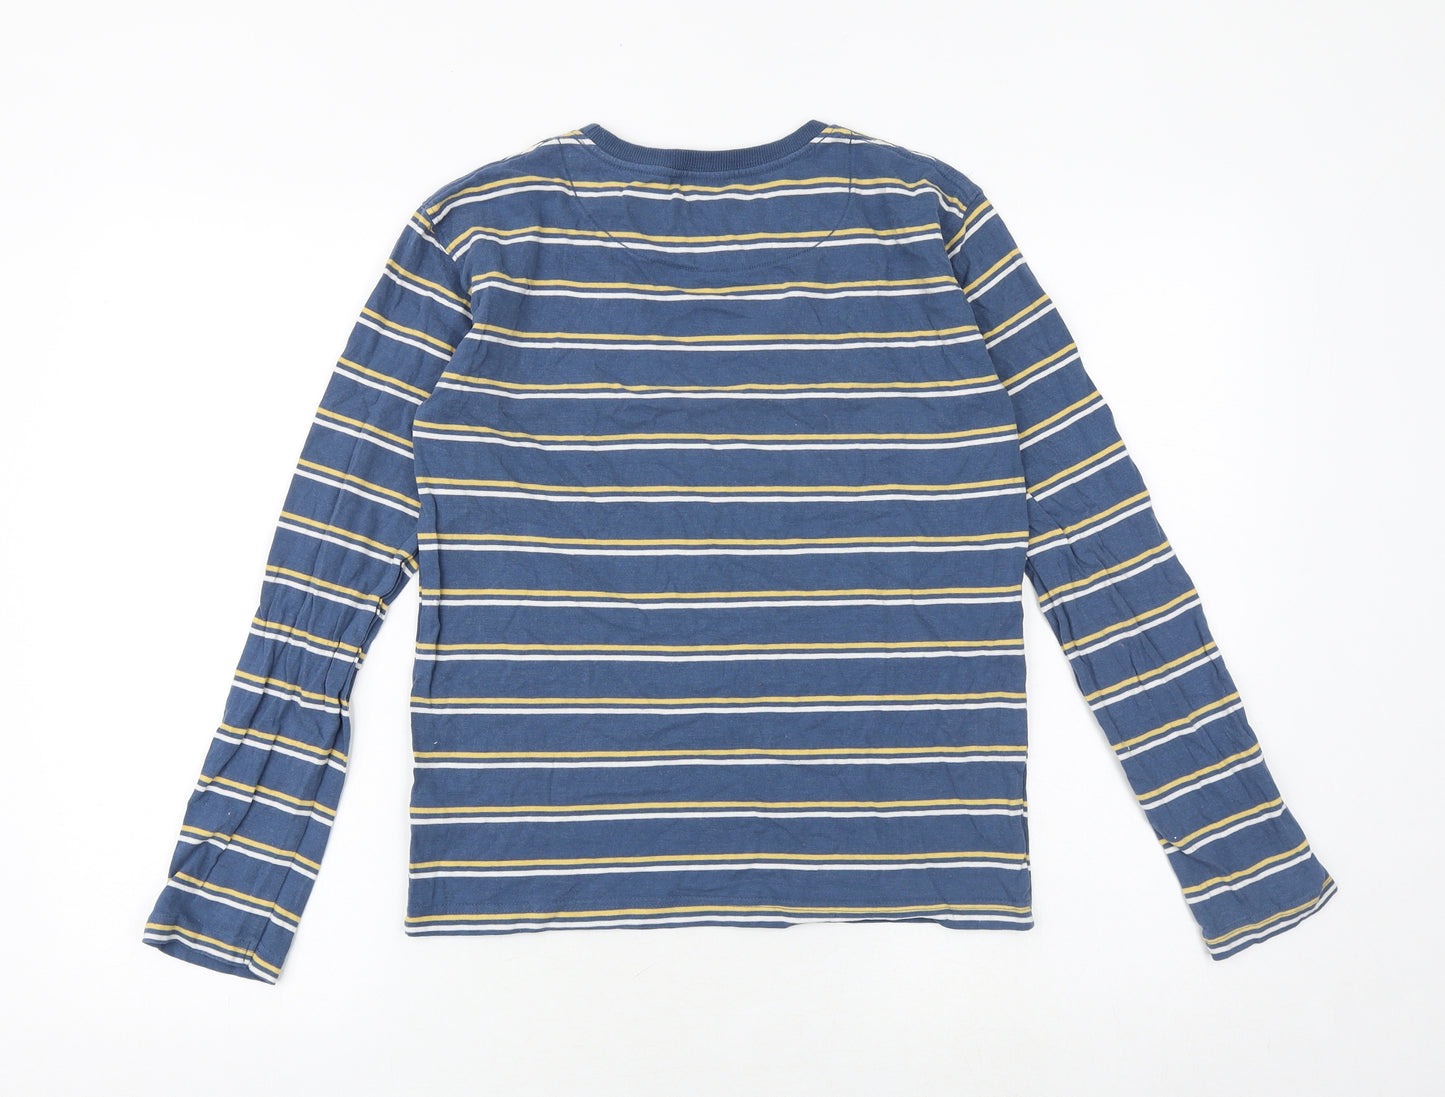 John Lewis Boys Blue Striped 100% Cotton Basic T-Shirt Size 13 Years Round Neck Pullover